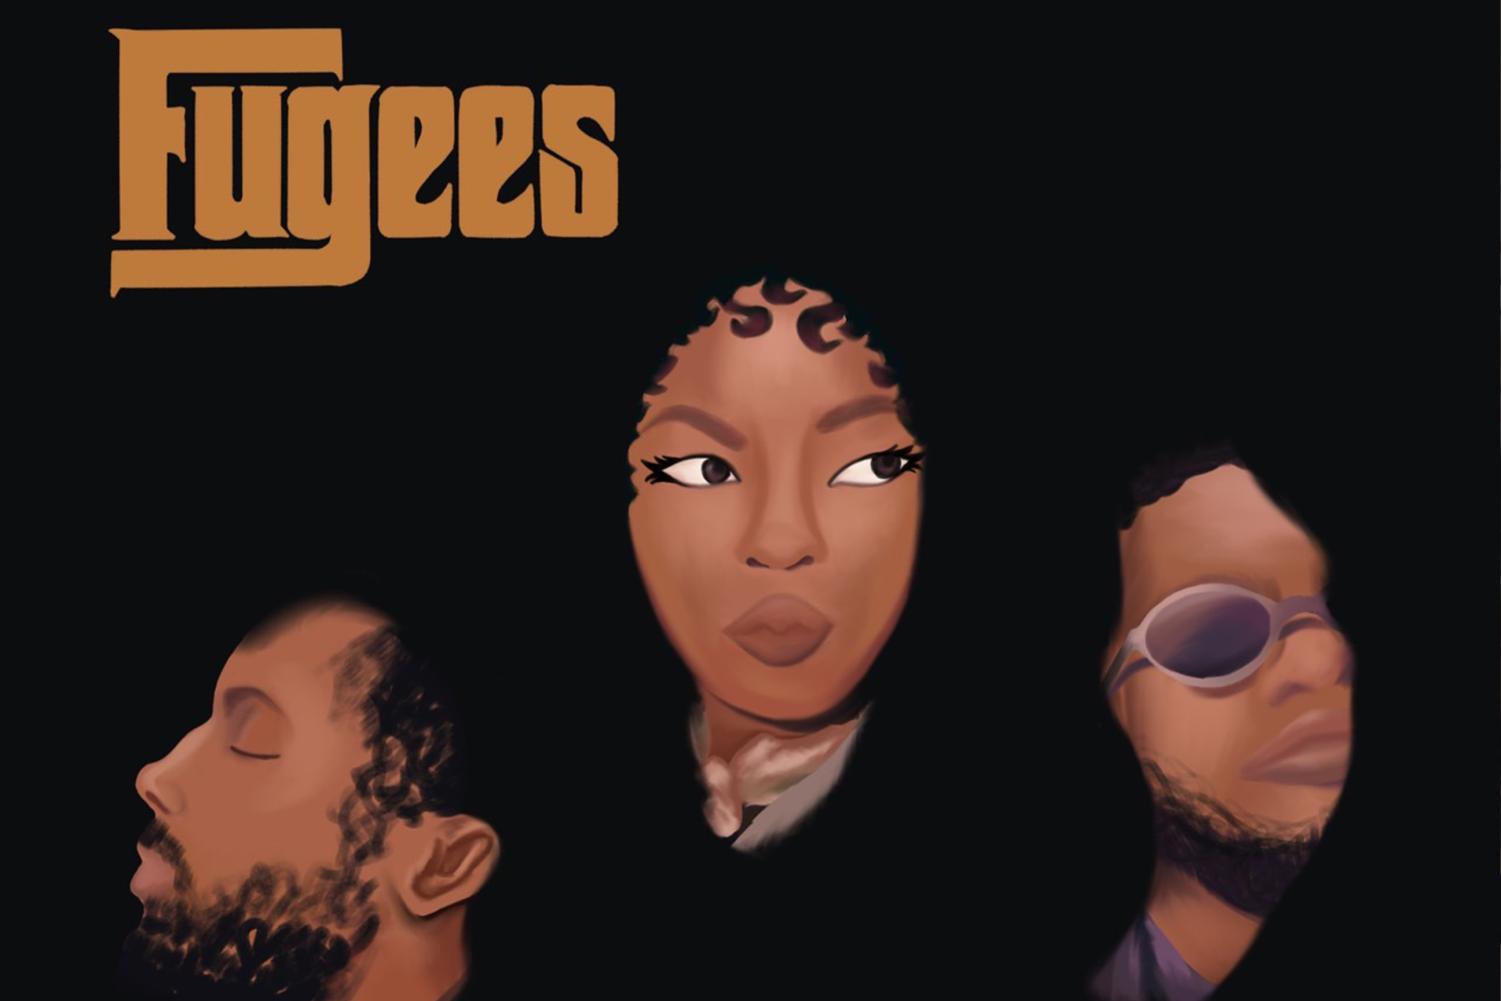 Meaning of No Woman, No Cry by Fugees